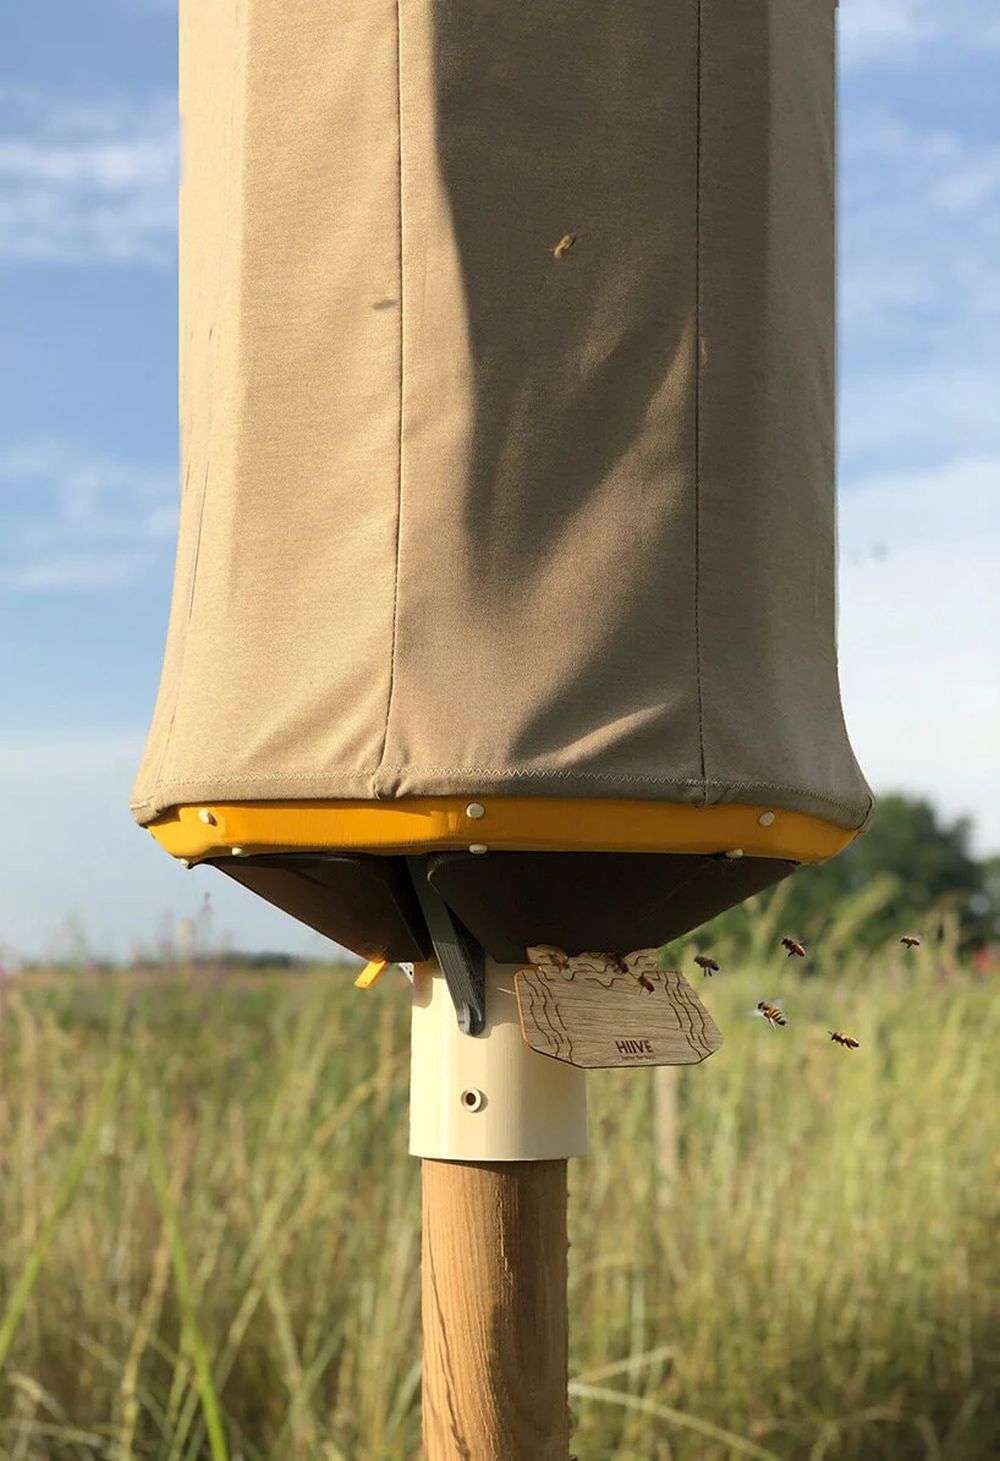 The HIIVE, a Bee Home Duplicates the microclimate of a Tree Cave